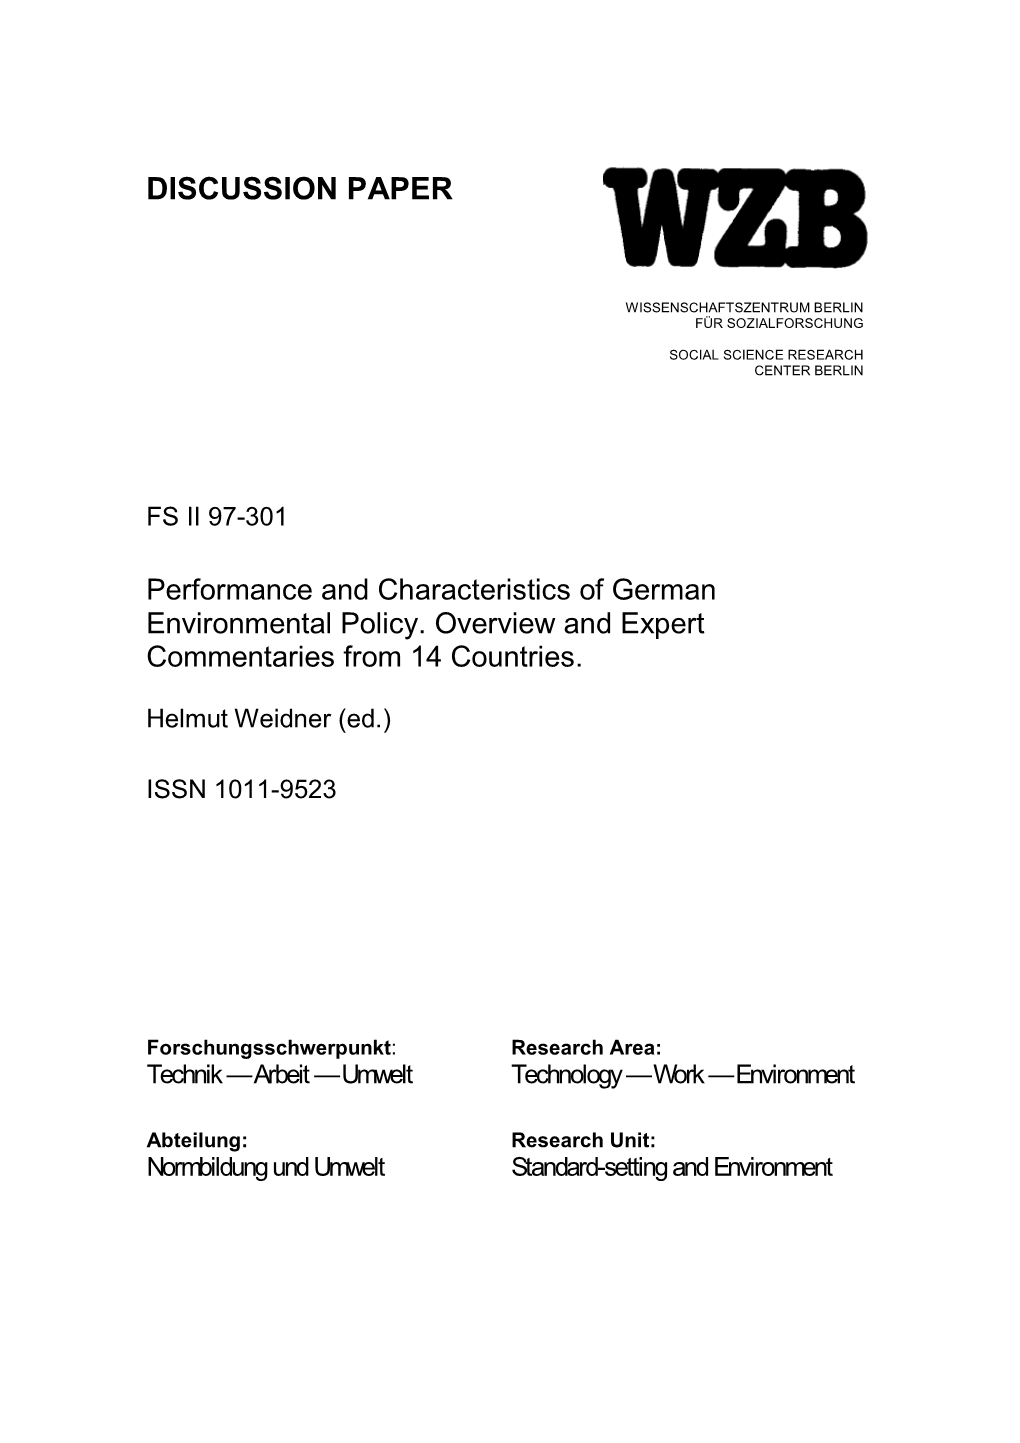 Performance and Characteristics of German Environmental Policy